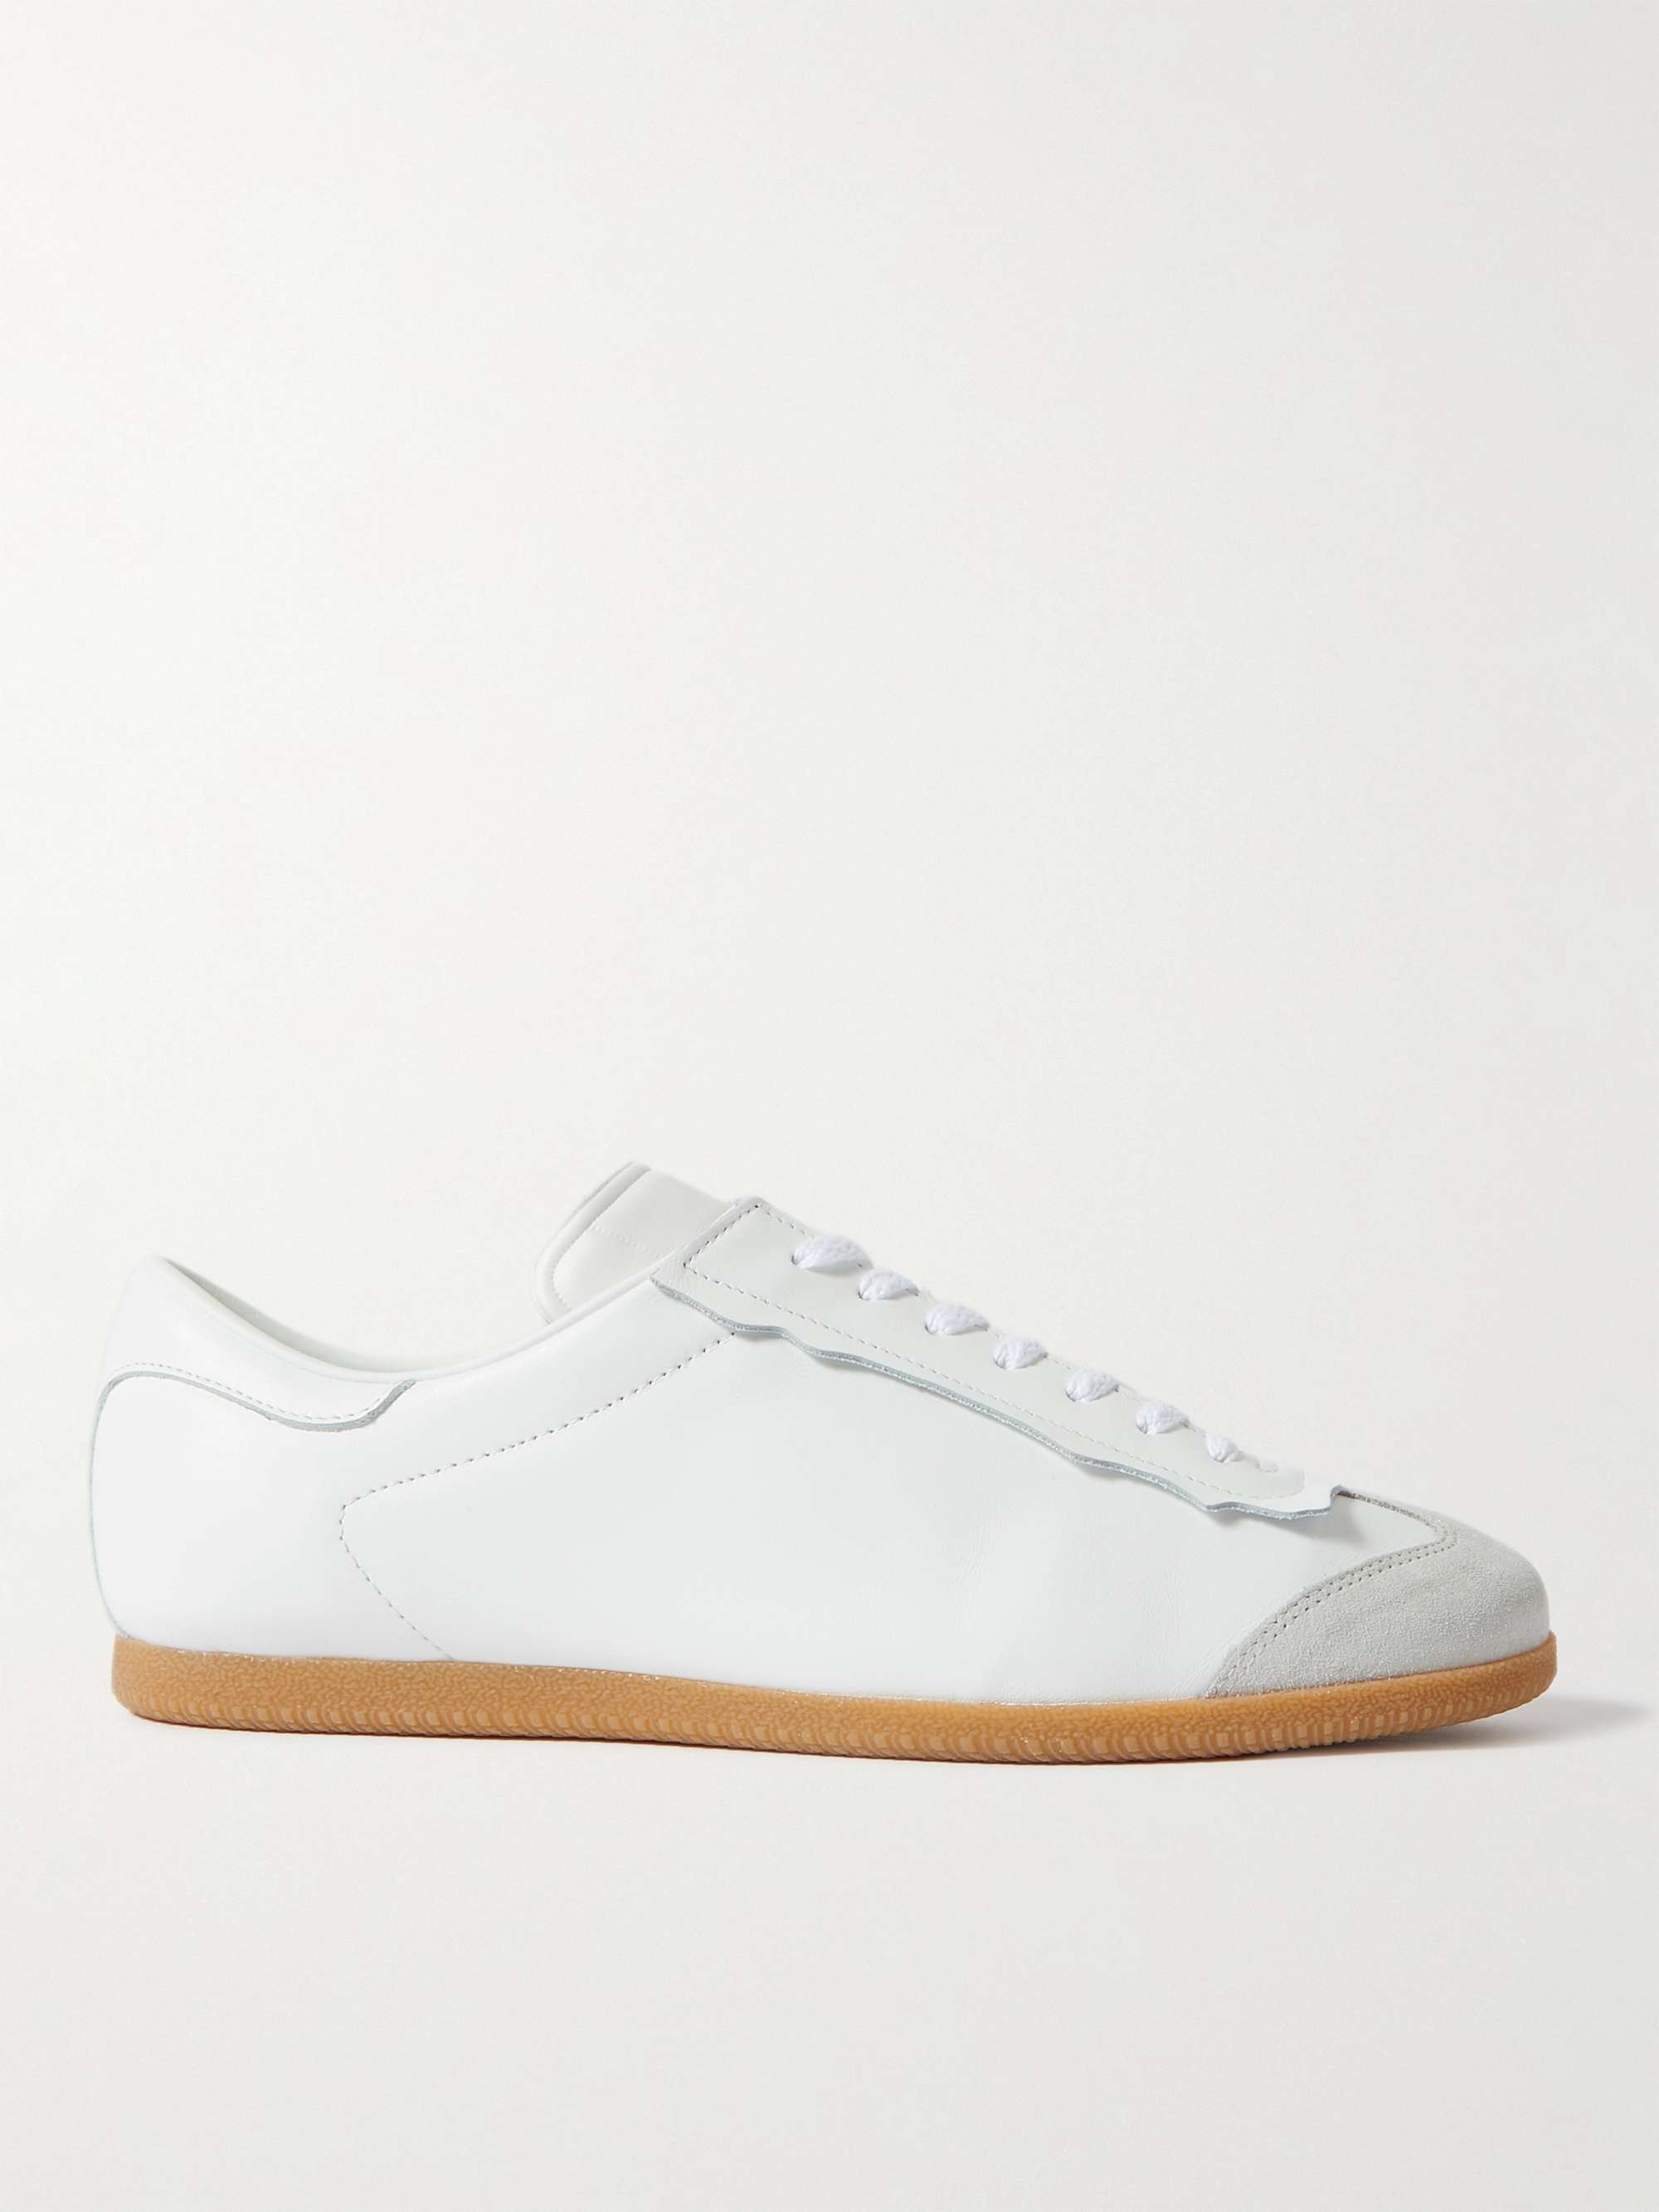 MAISON MARGIELA Feather Light Suede-Panelled Leather Sneakers | MR